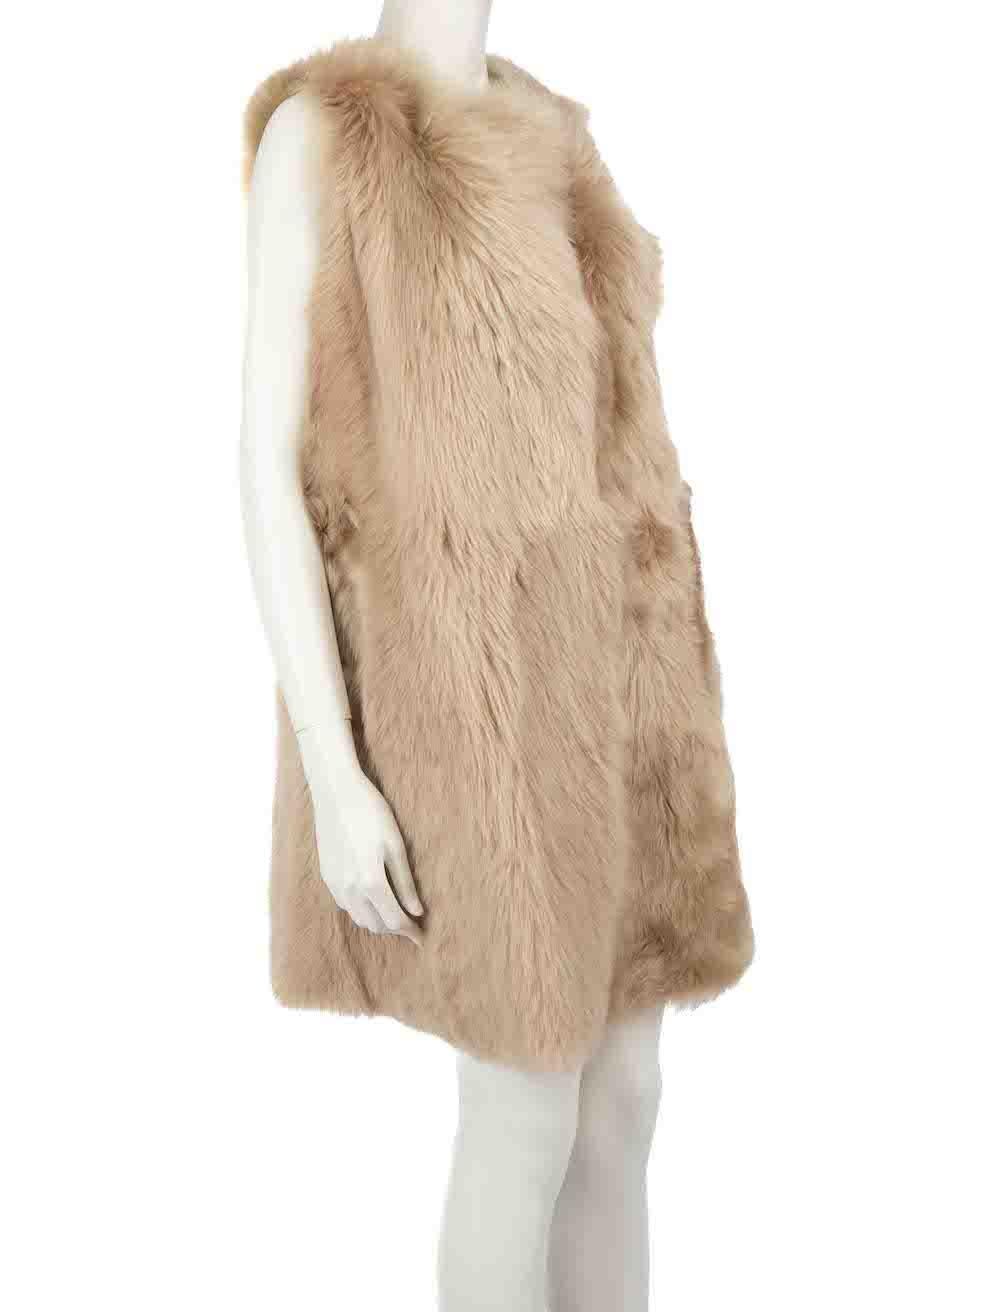 CONDITION is Very good. Minimal wear to jacket is evident. Minimal wear to both shoulders and front with discoloured marks to the leather on this used Max Mara Studio designer resale item.
 
 
 
 Details
 
 
 Beige
 
 Leather
 
 Gilet
 
 Mid length
